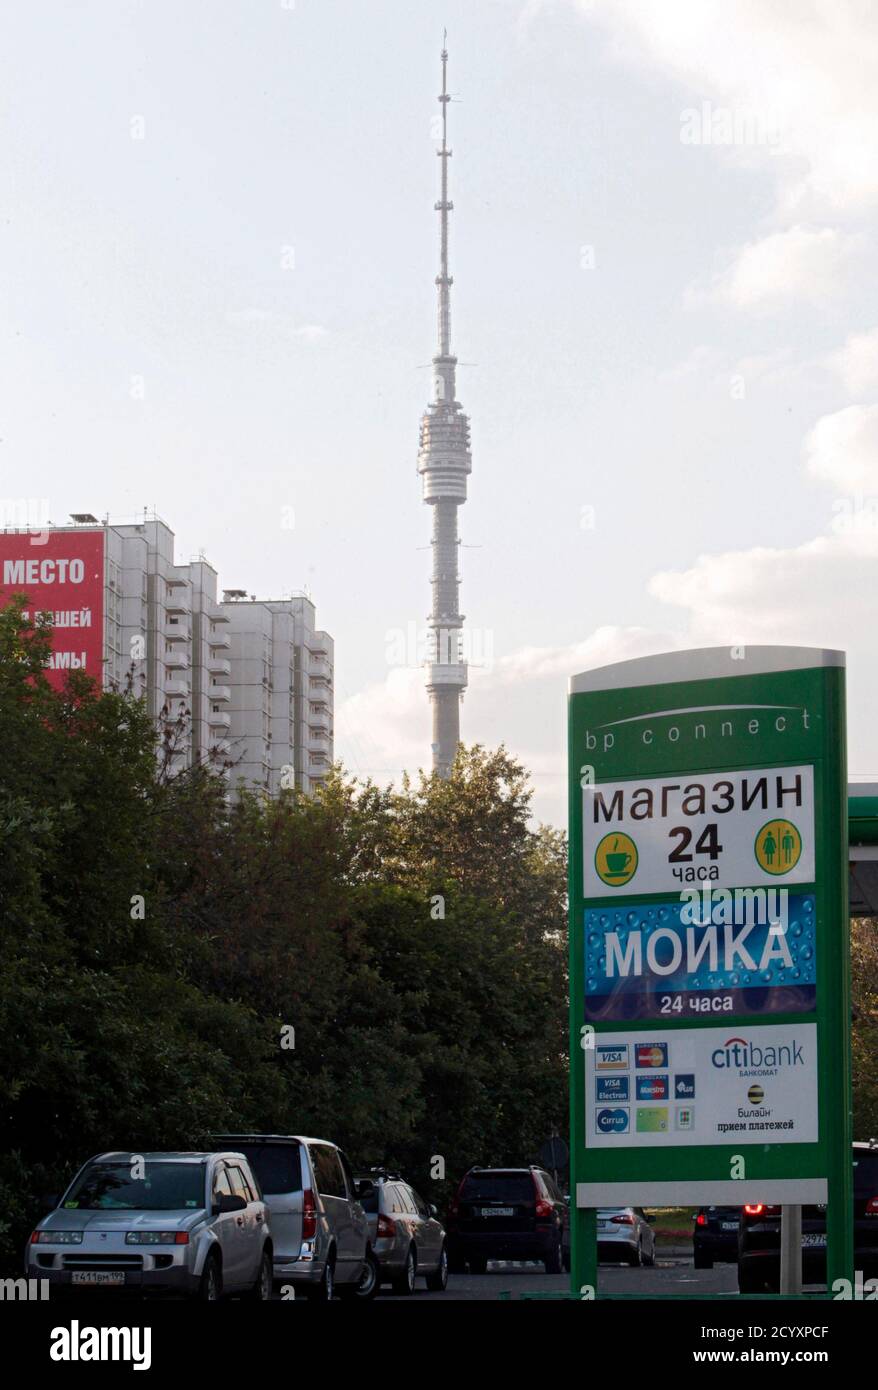 A sign board of a BP petrol filling station is seen with the Ostankino telecommunications tower in the background, in Moscow June 1, 2012. A Russian state firm has offered to buy BP Plc's half share in its Siberian joint venture, a source said on Friday, in what would amount to a stunning reversal for the British firm and a bold assertion of Kremlin control over the oil sector.  REUTERS/Sergei Karpukhin  (RUSSIA - Tags: BUSINESS ENERGY) Stock Photo